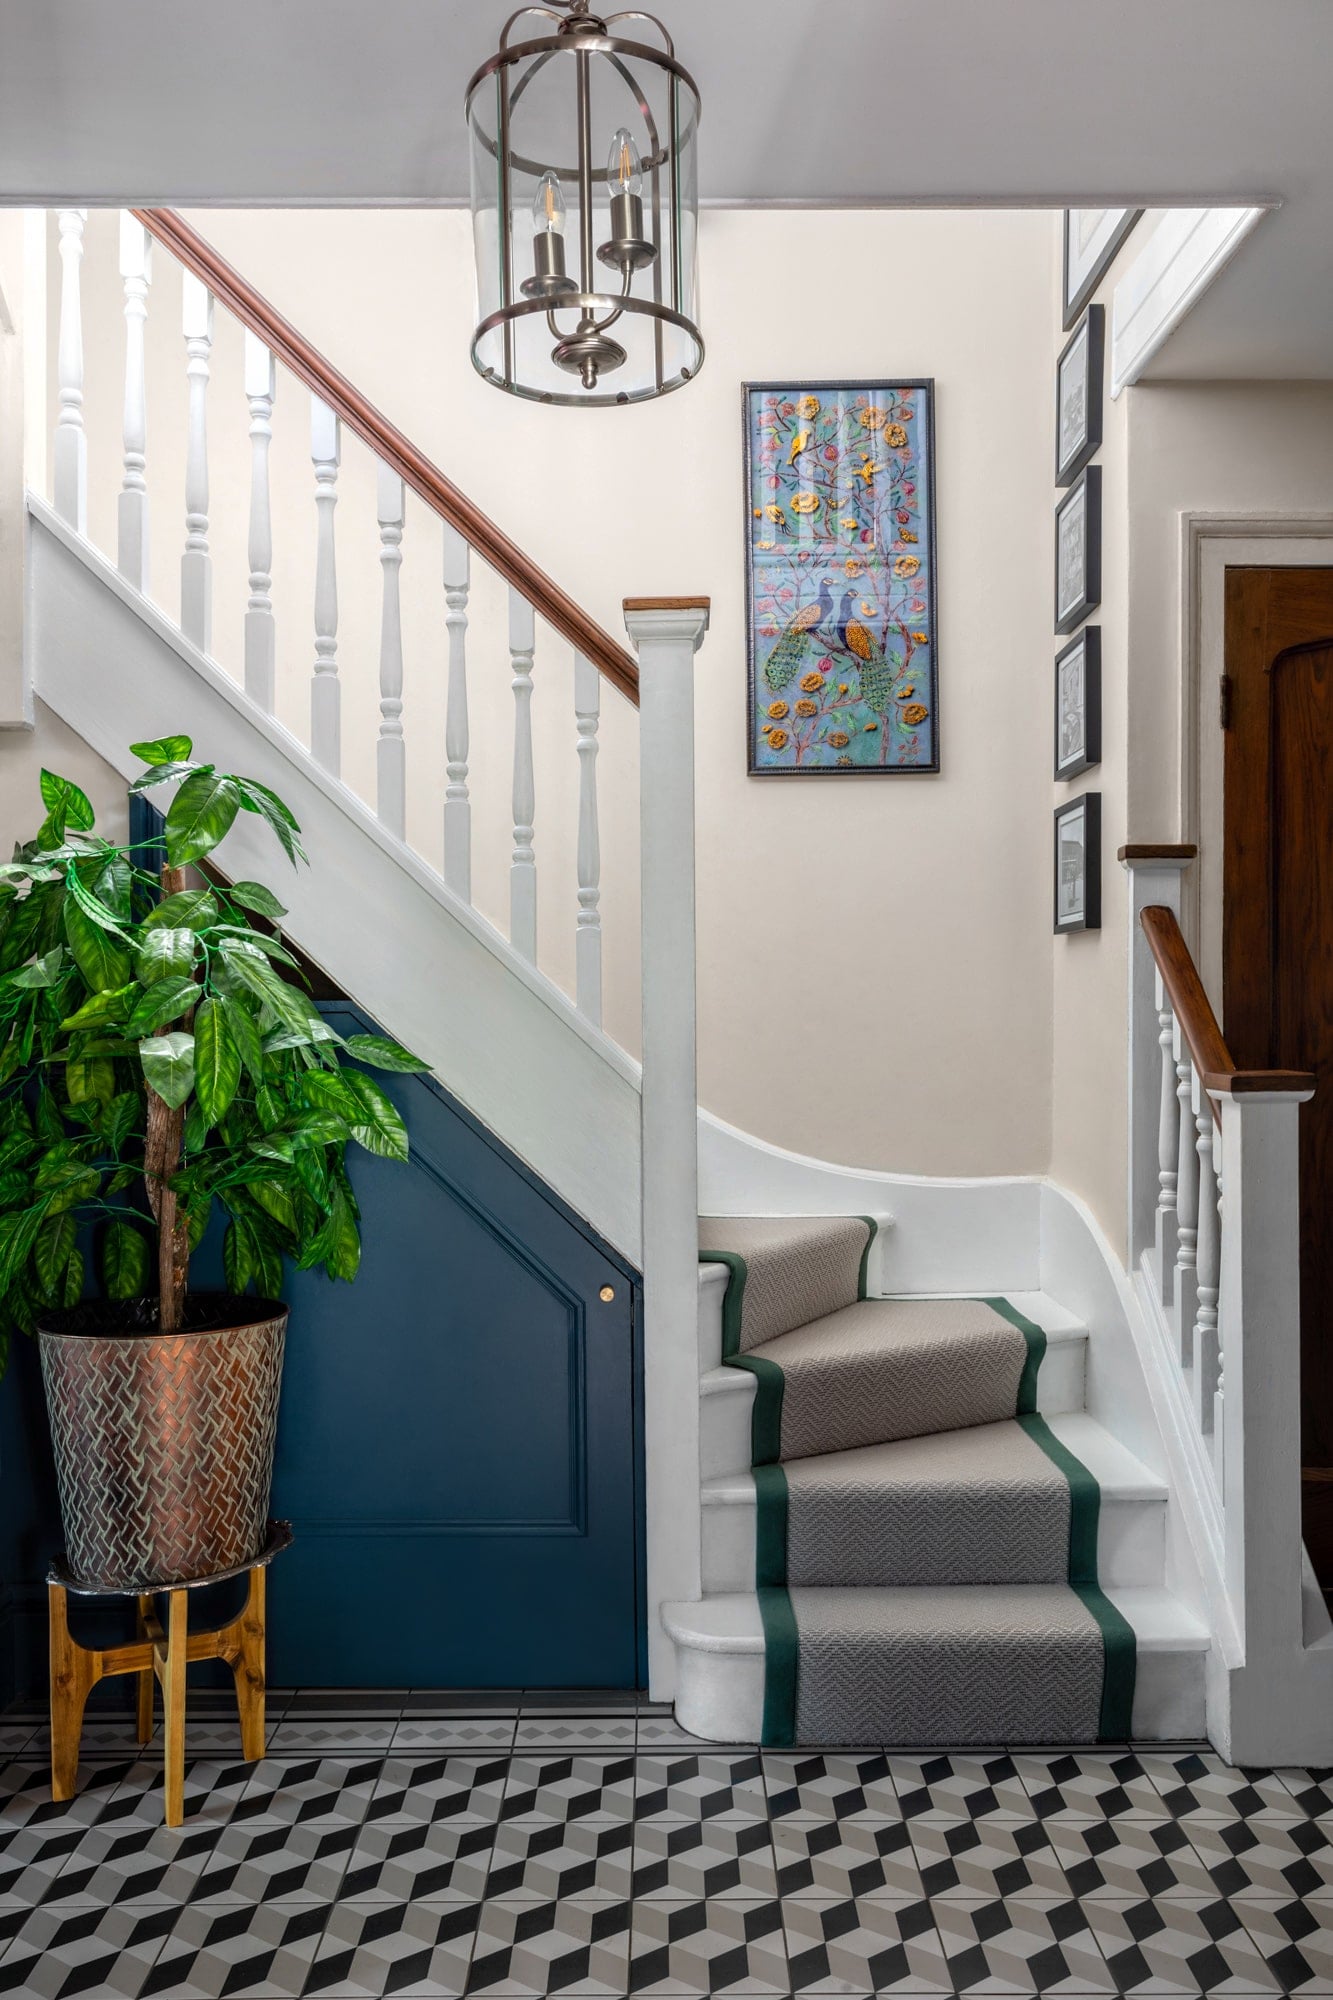 Interior photo of a staircase eclectic style house